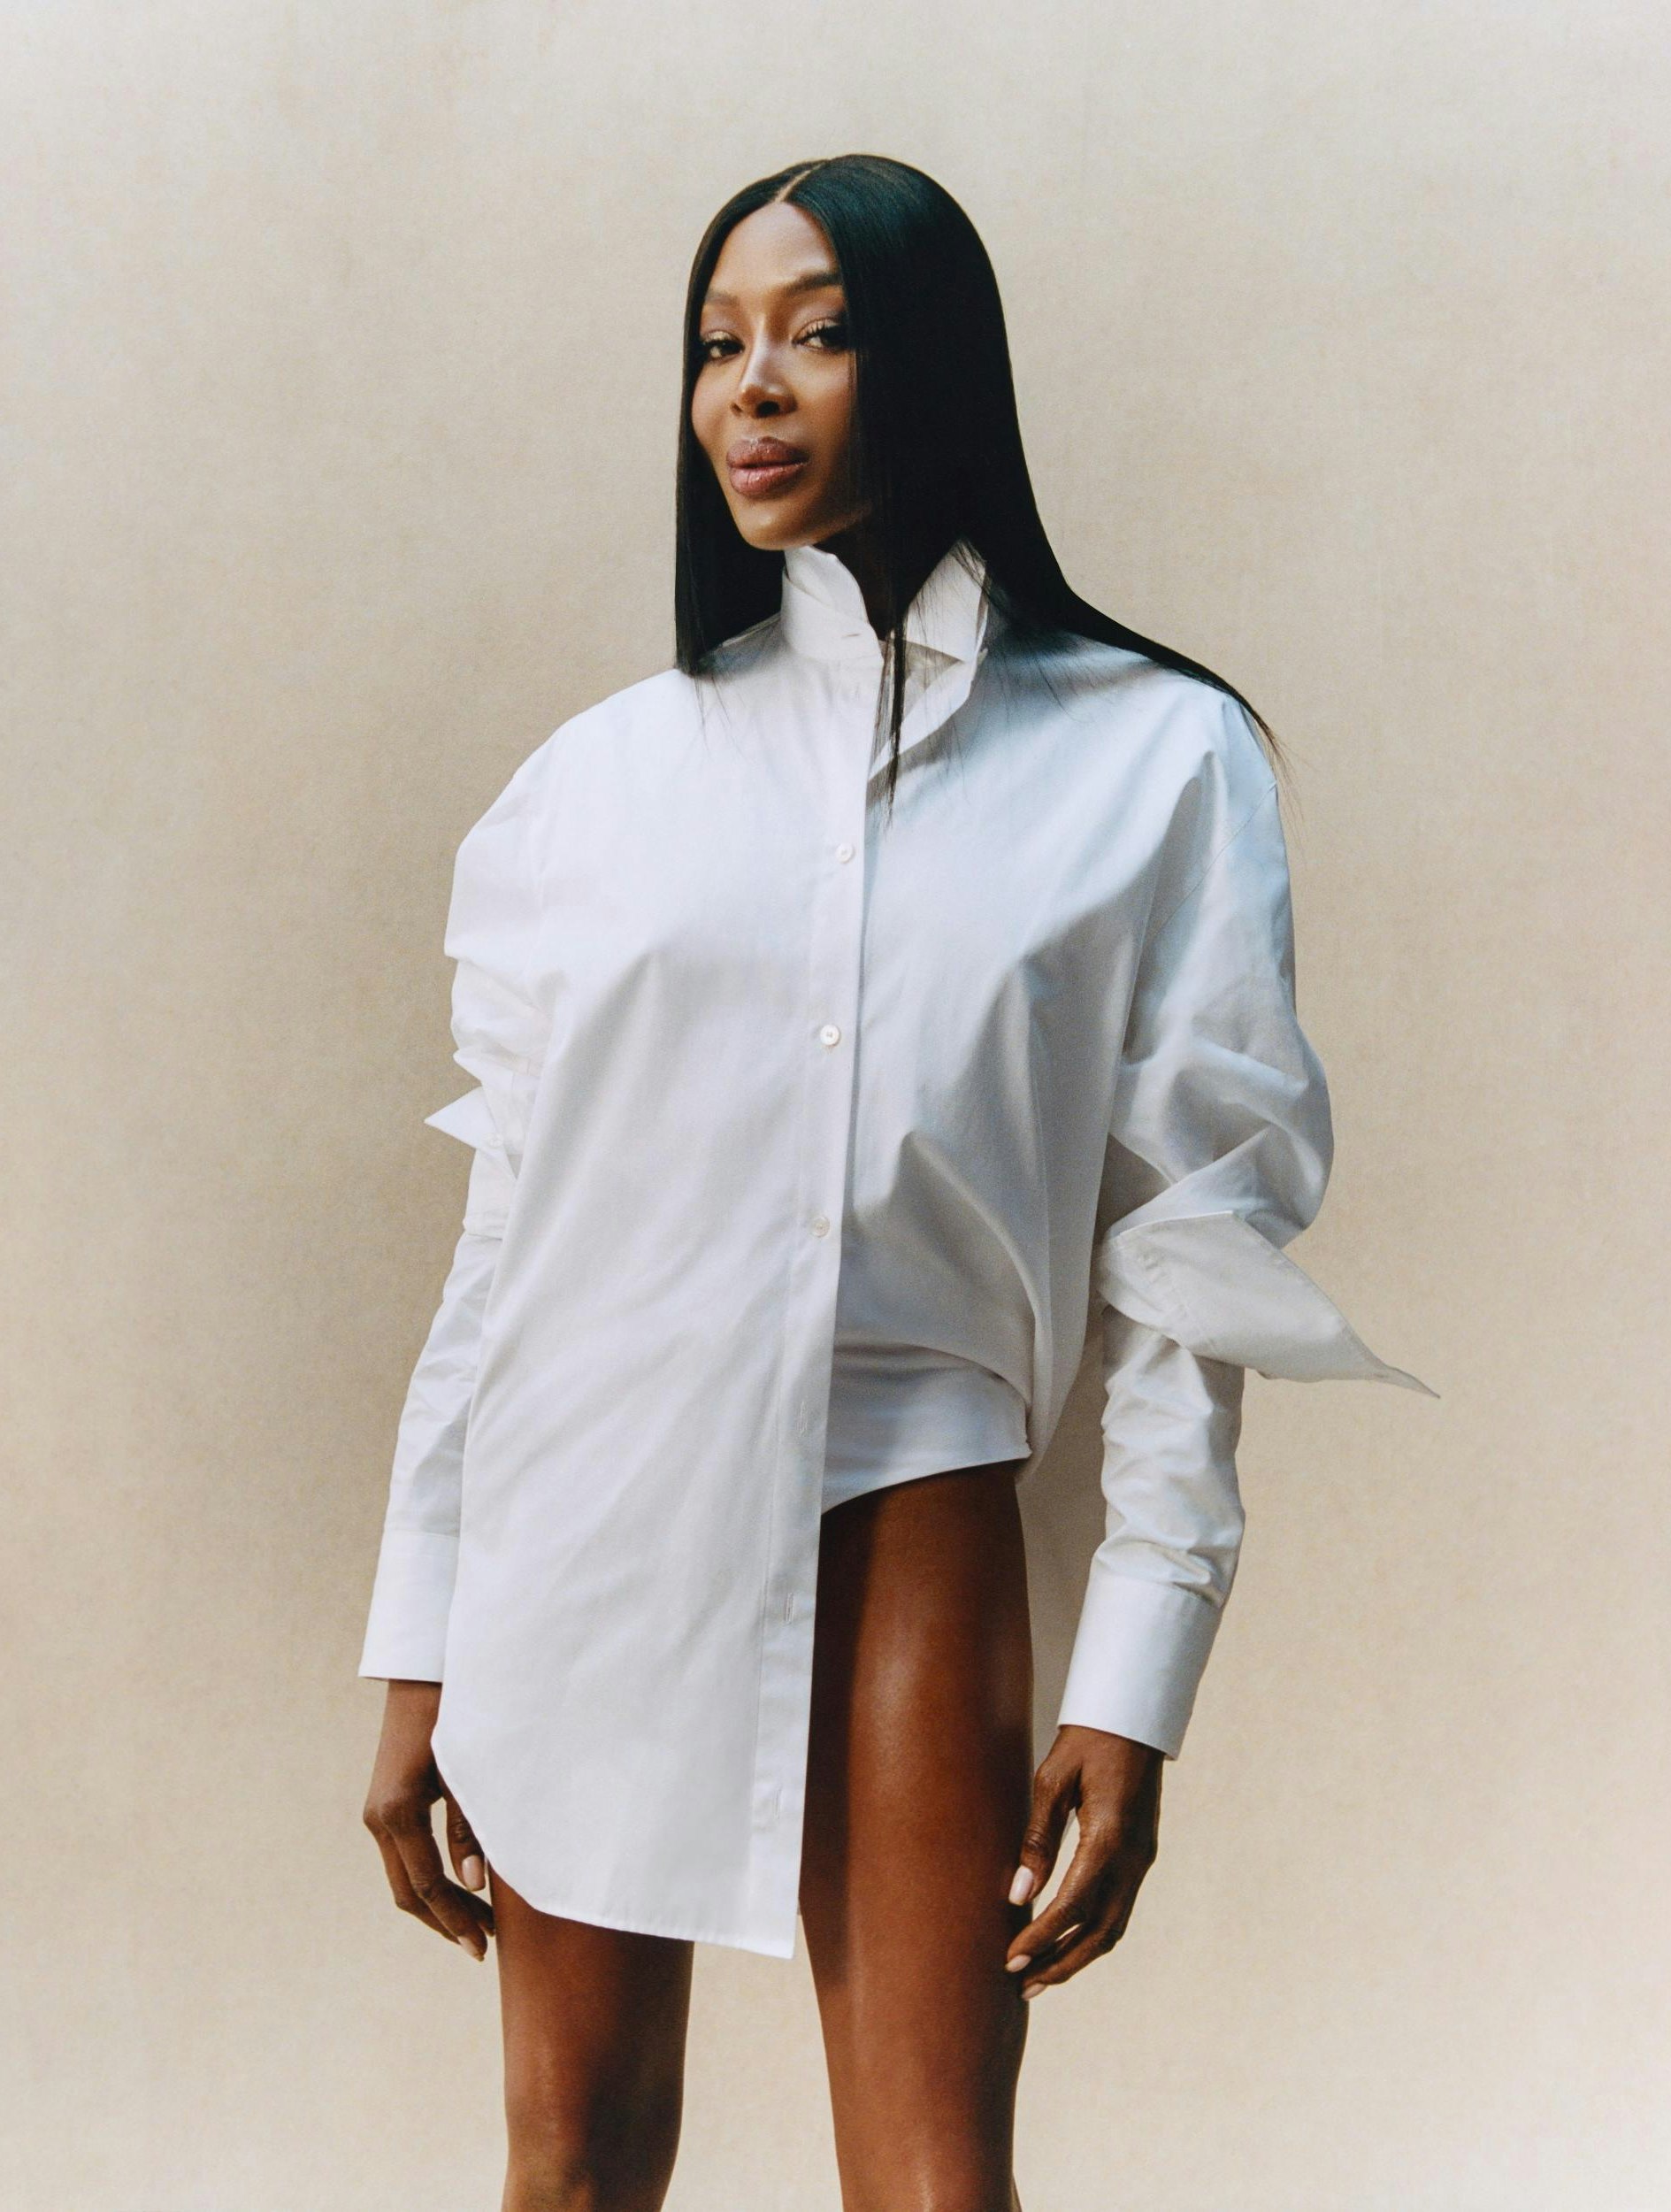 Naomi Campbell interview ELLE